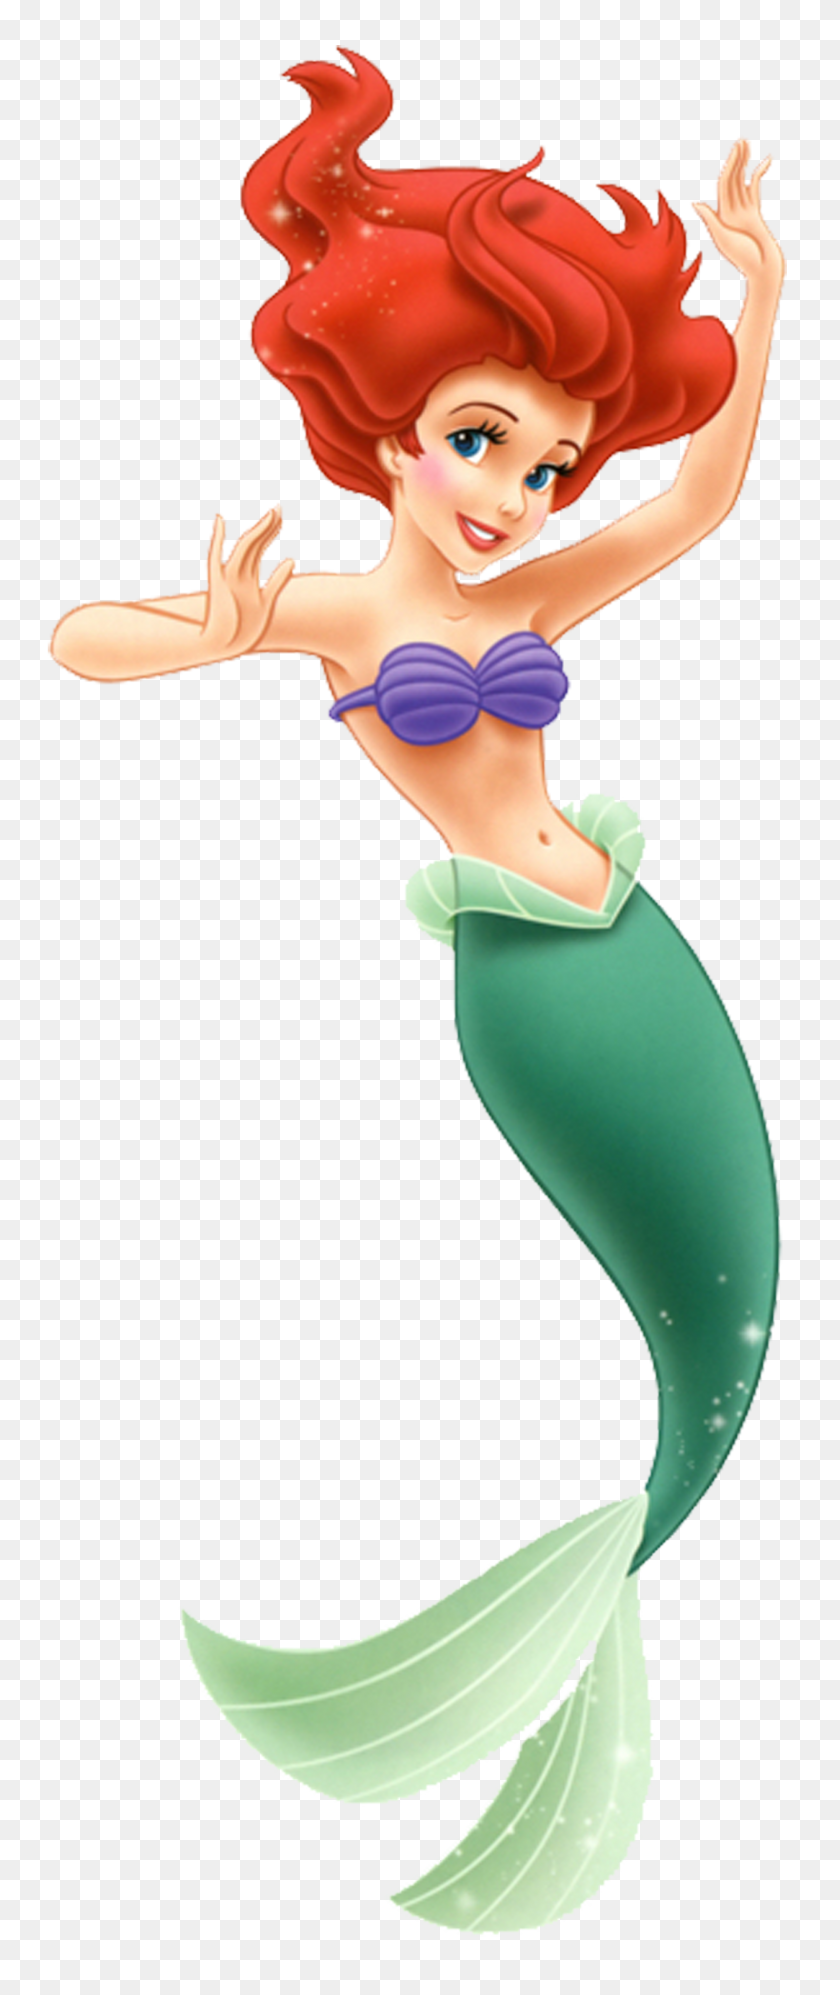 1753x4350 The Little Mermaid Photos For Computer - The Little Mermaid PNG